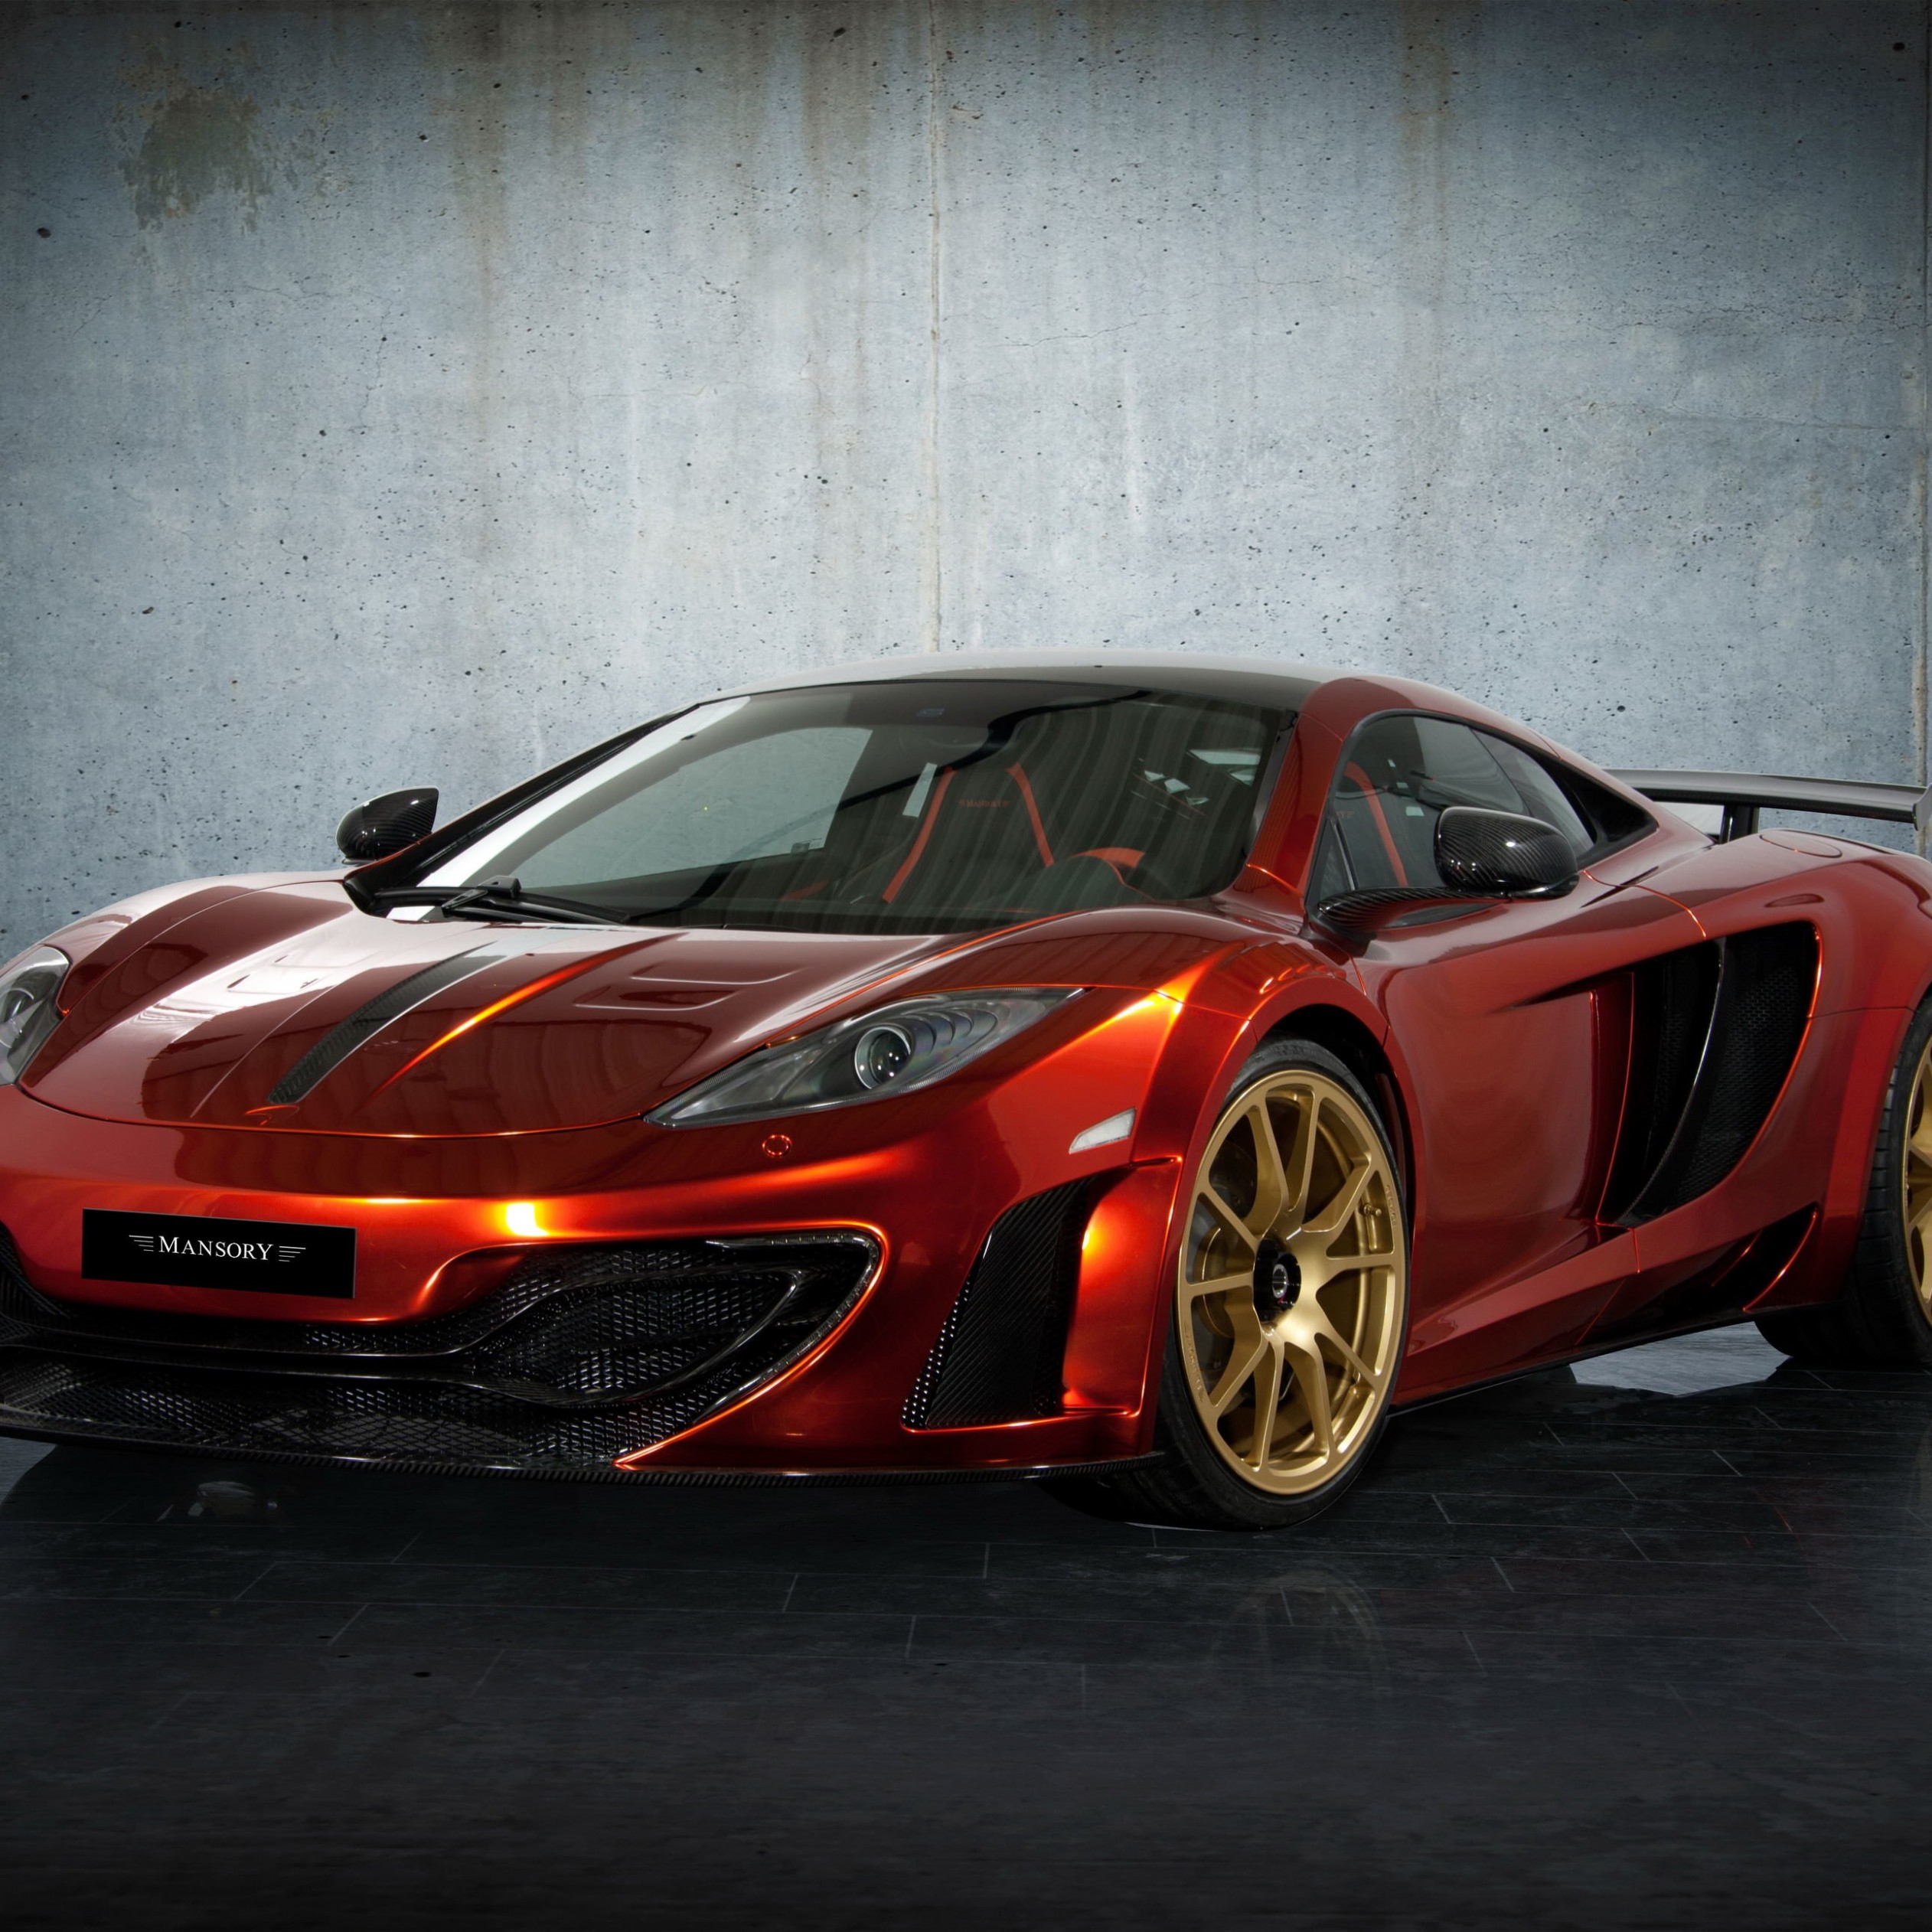 McLaren MP4-12Cf By Mansory Wallpaper for Apple iPad 4